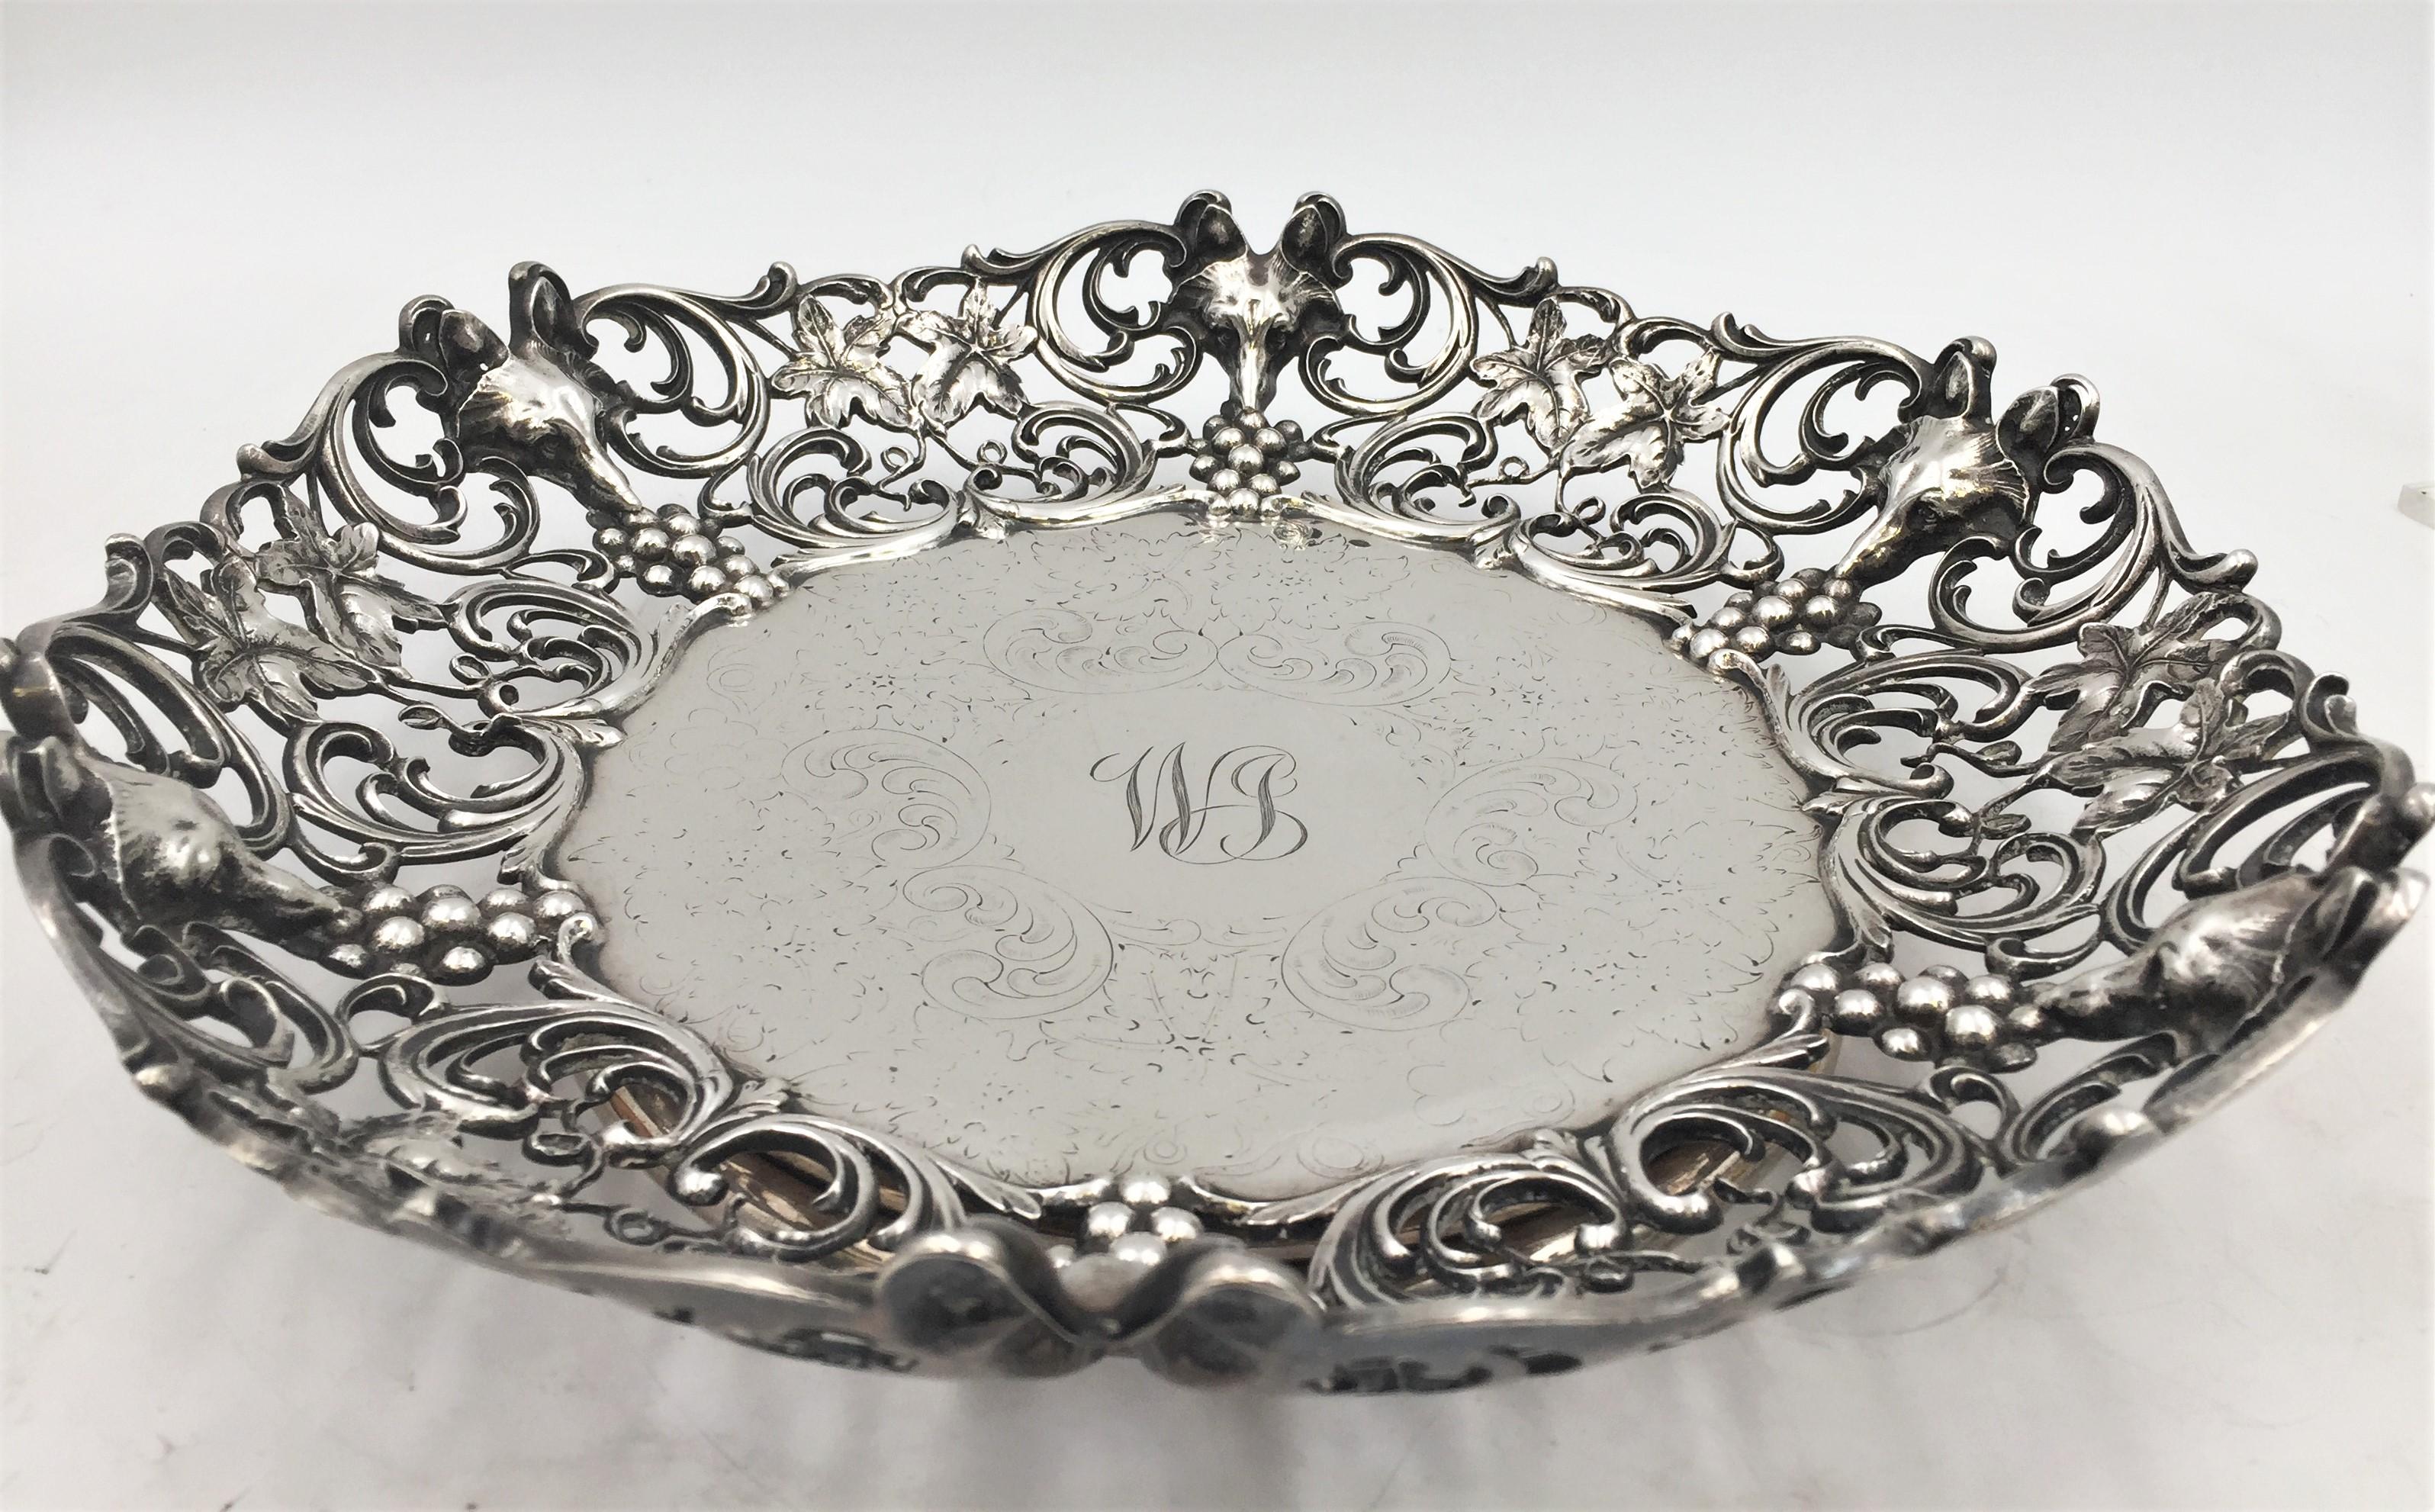 Early 20th century sterling silver bowl designed by Roger Williams, retailed by Spaulding Co. Designed with scrolls, foxes' head around rim, and grape clusters and grape leaves. Measuring 11 3/4 inches in diameter, weighing 33.65 troy ounces.